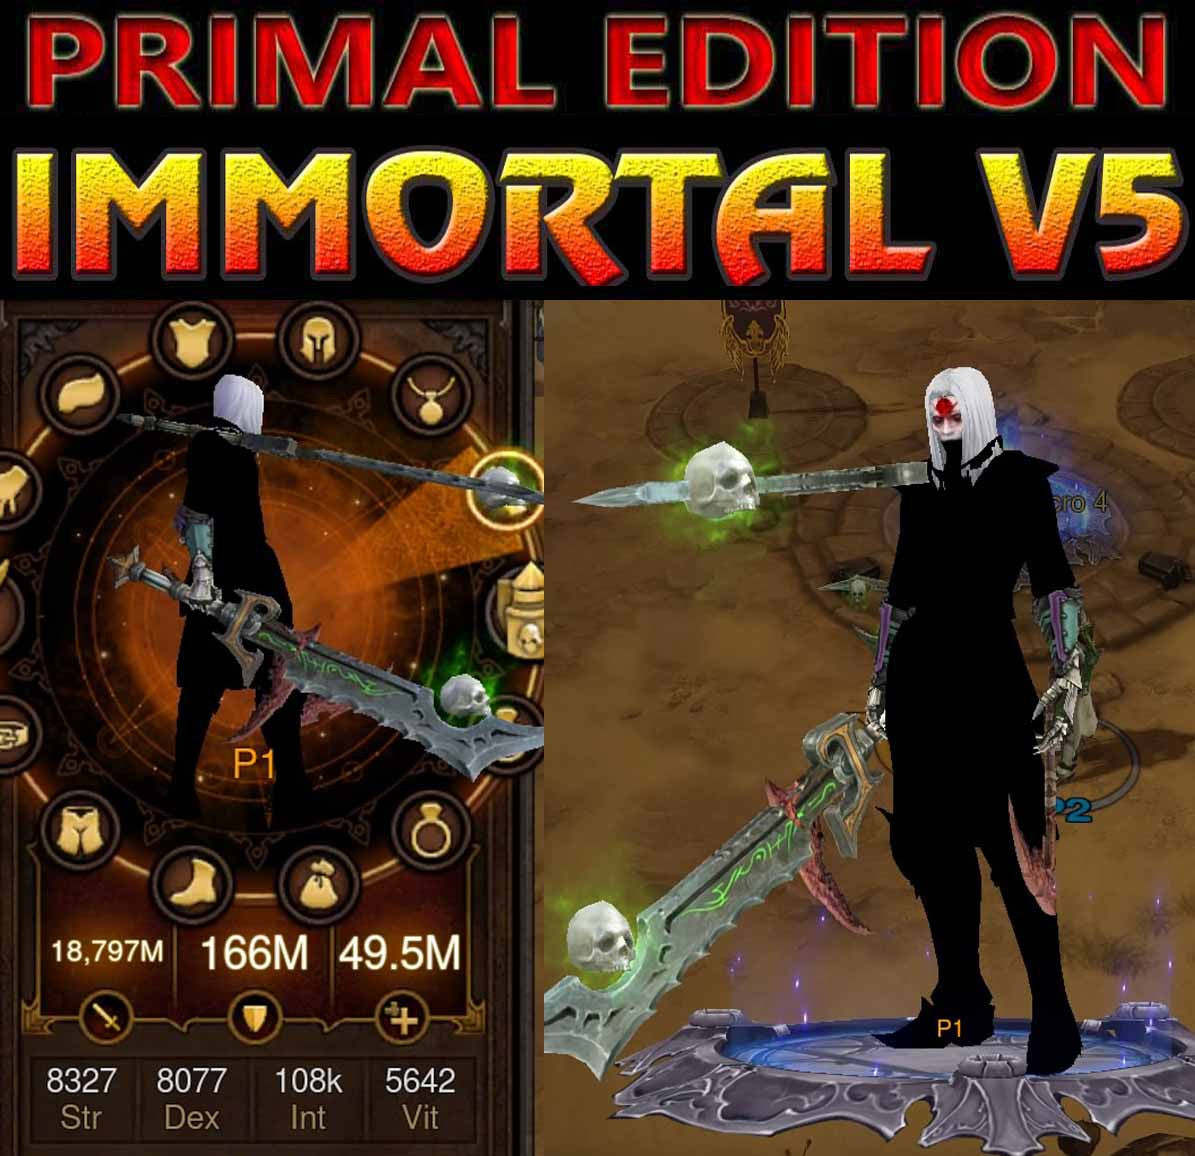 [Primal Ancient] Diablo 3 Immortal v5 Vain Modded Necromancer Rathma Set Diablo 3 Mods ROS Seasonal and Non Seasonal Save Mod - Modded Items and Gear - Hacks - Cheats - Trainers for Playstation 4 - Playstation 5 - Nintendo Switch - Xbox One